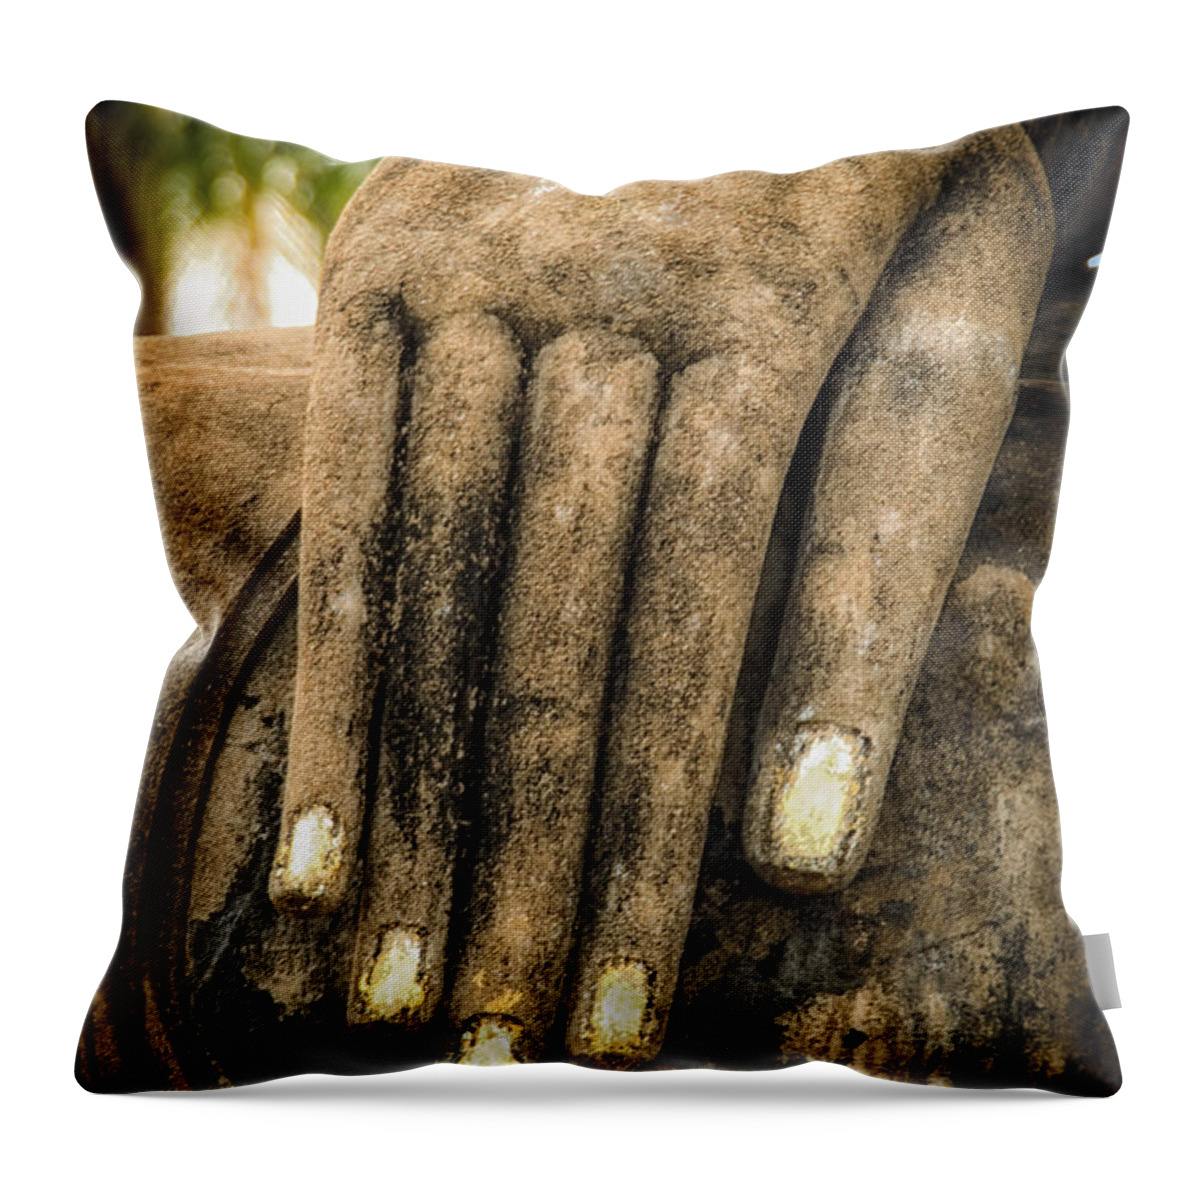 Sukhothai Throw Pillow featuring the photograph Buddha Hand by Adrian Evans